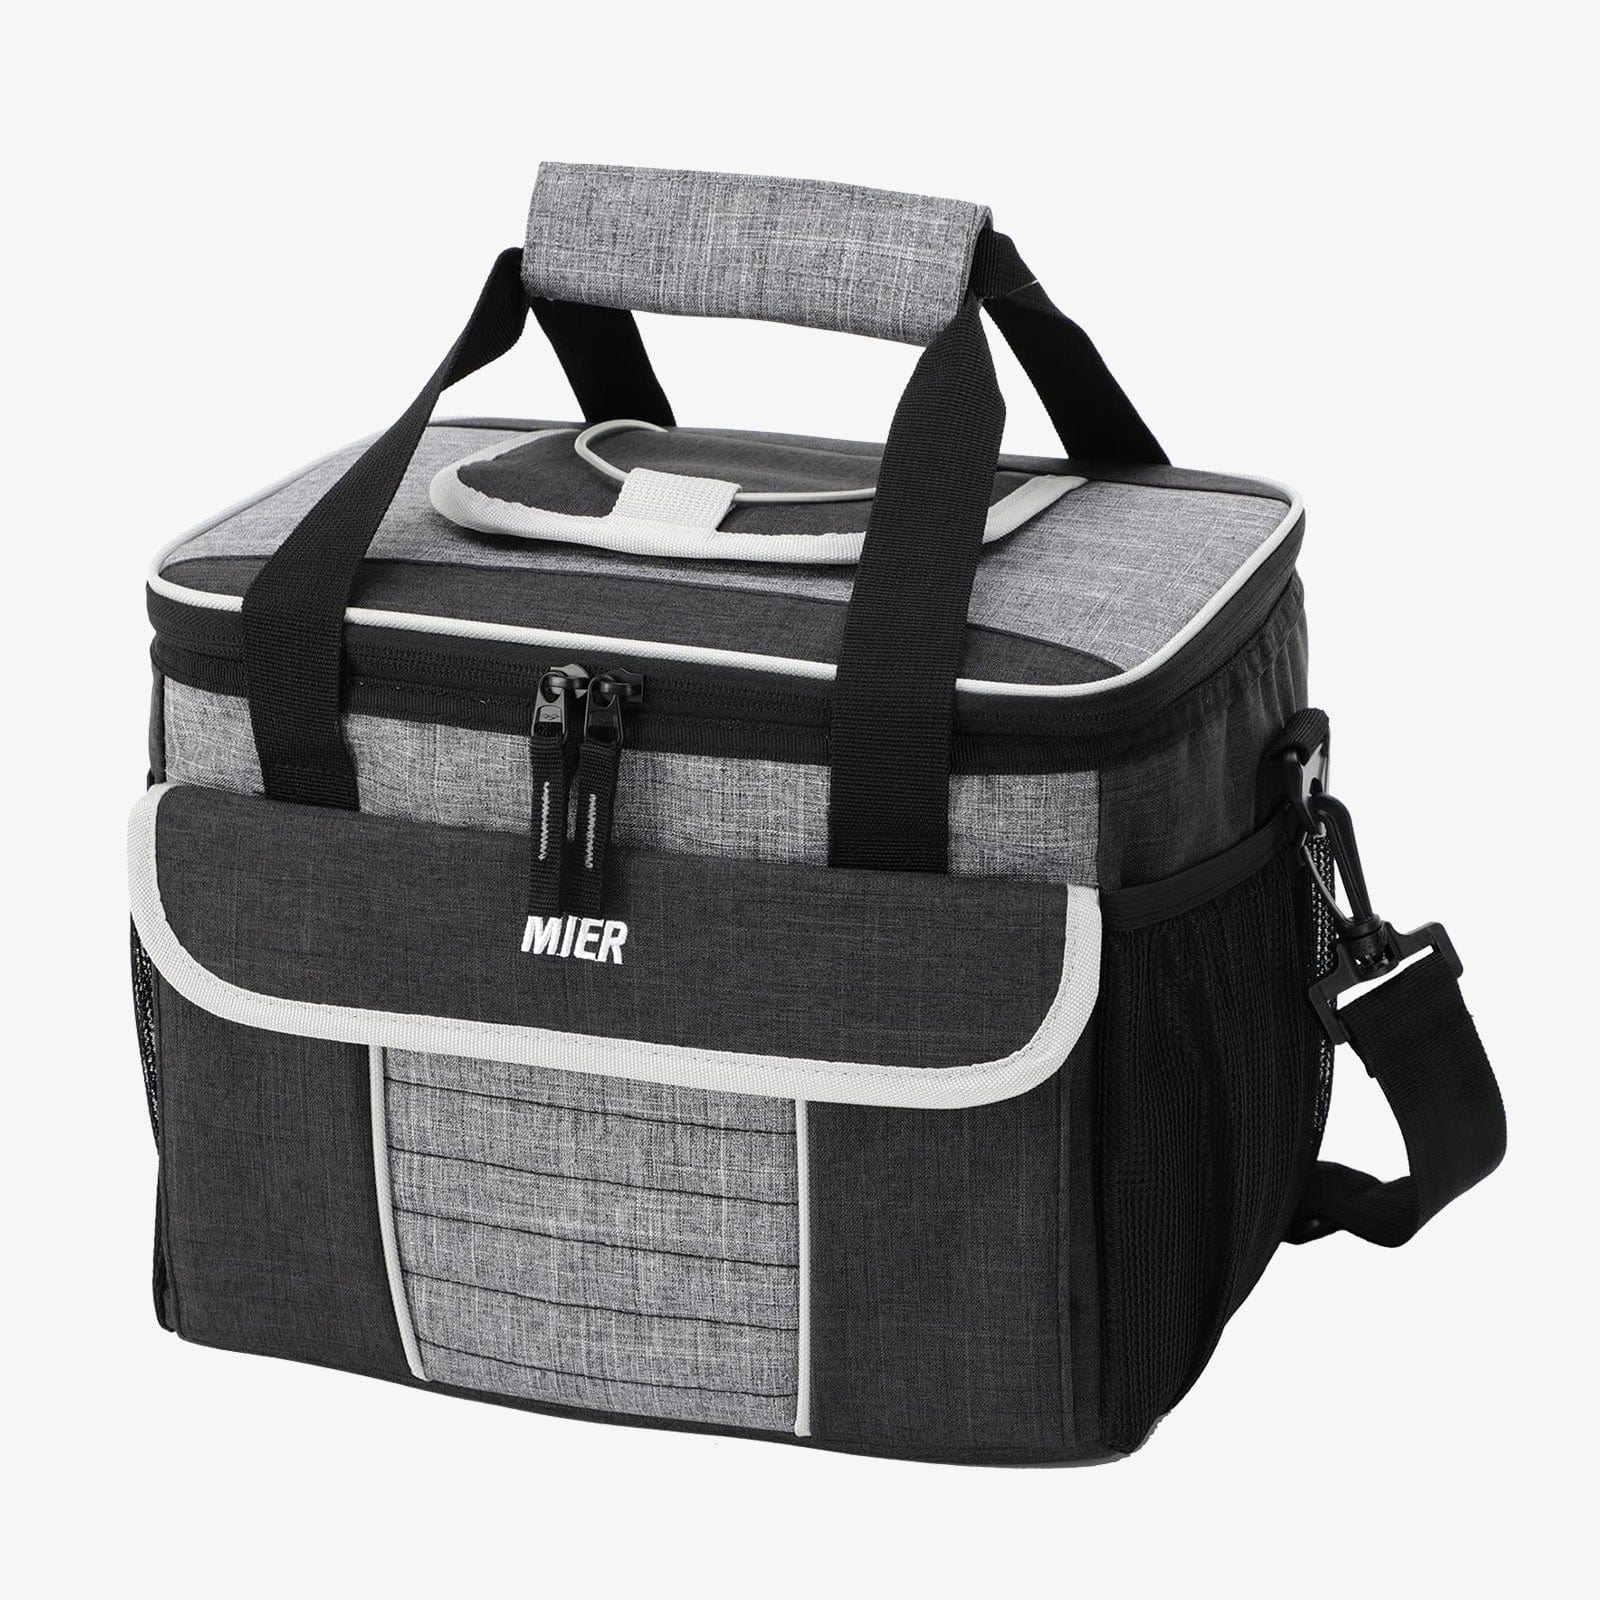 Mier Insulated Lunch Box